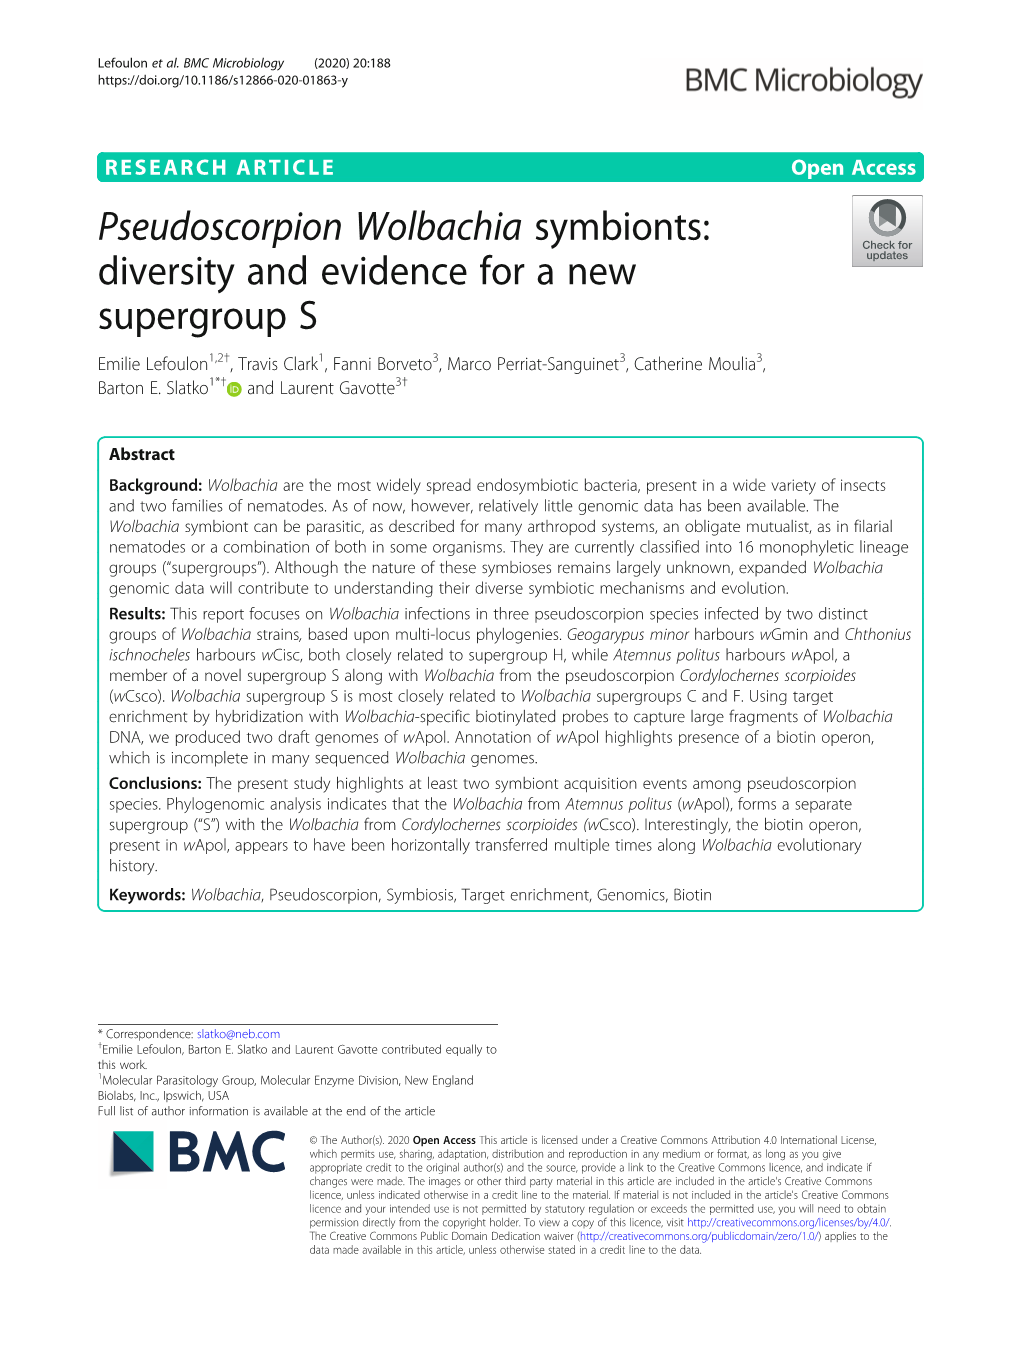 Pseudoscorpion Wolbachia Symbionts: Diversity and Evidence for a New